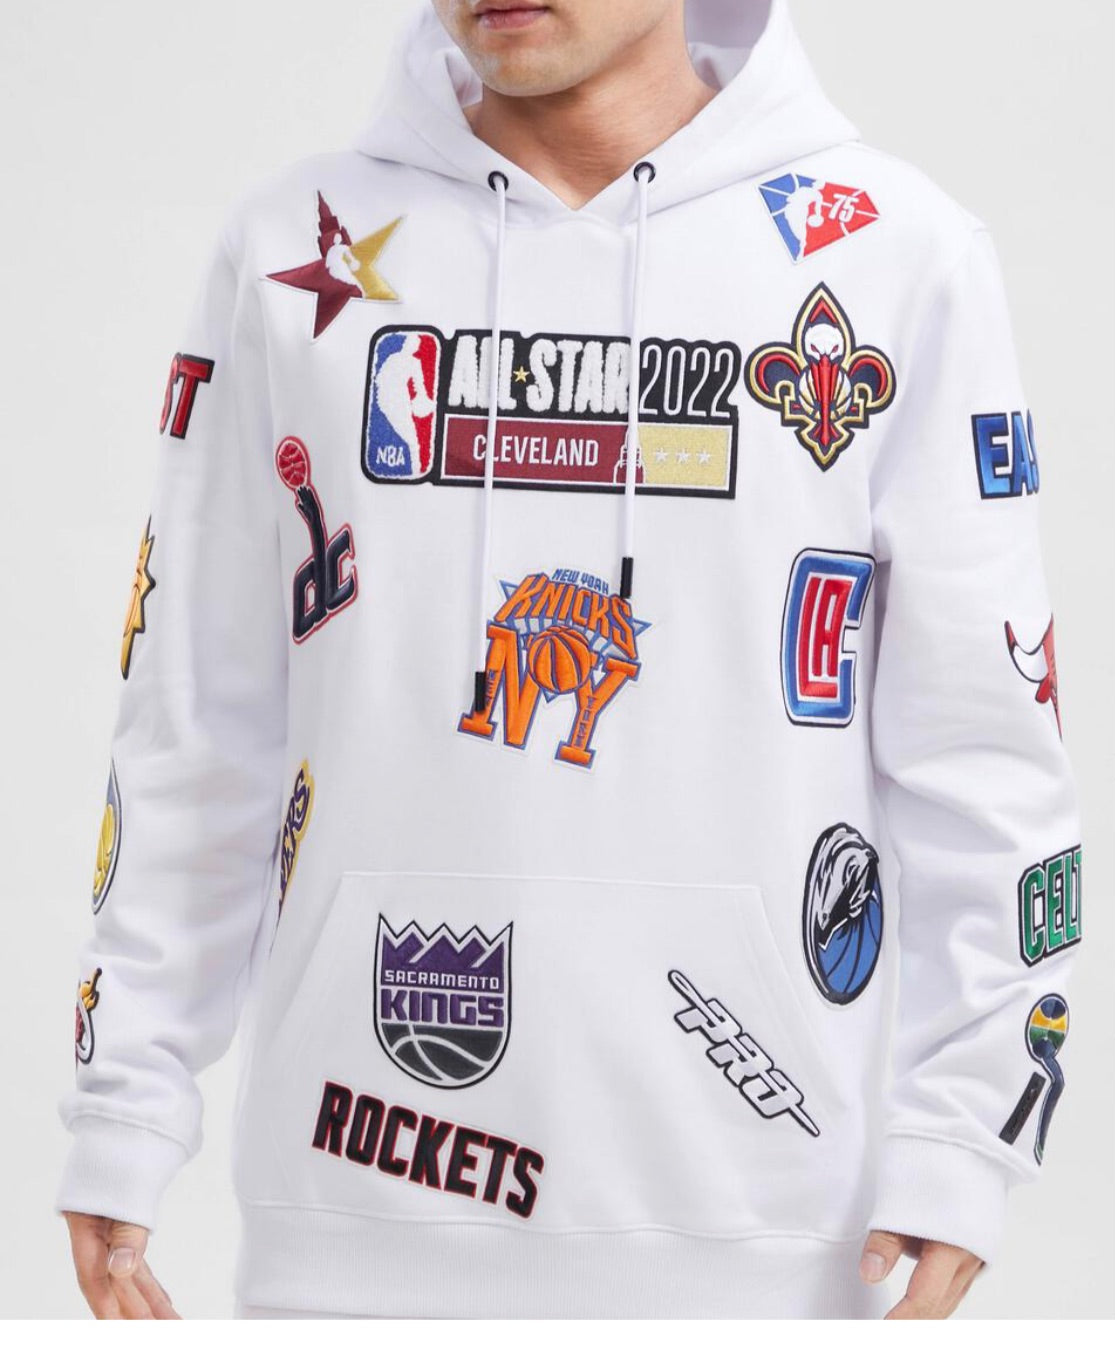 NBA All Star Game Cleveland 2022 Pro Standard Men’s Hooded Sweater